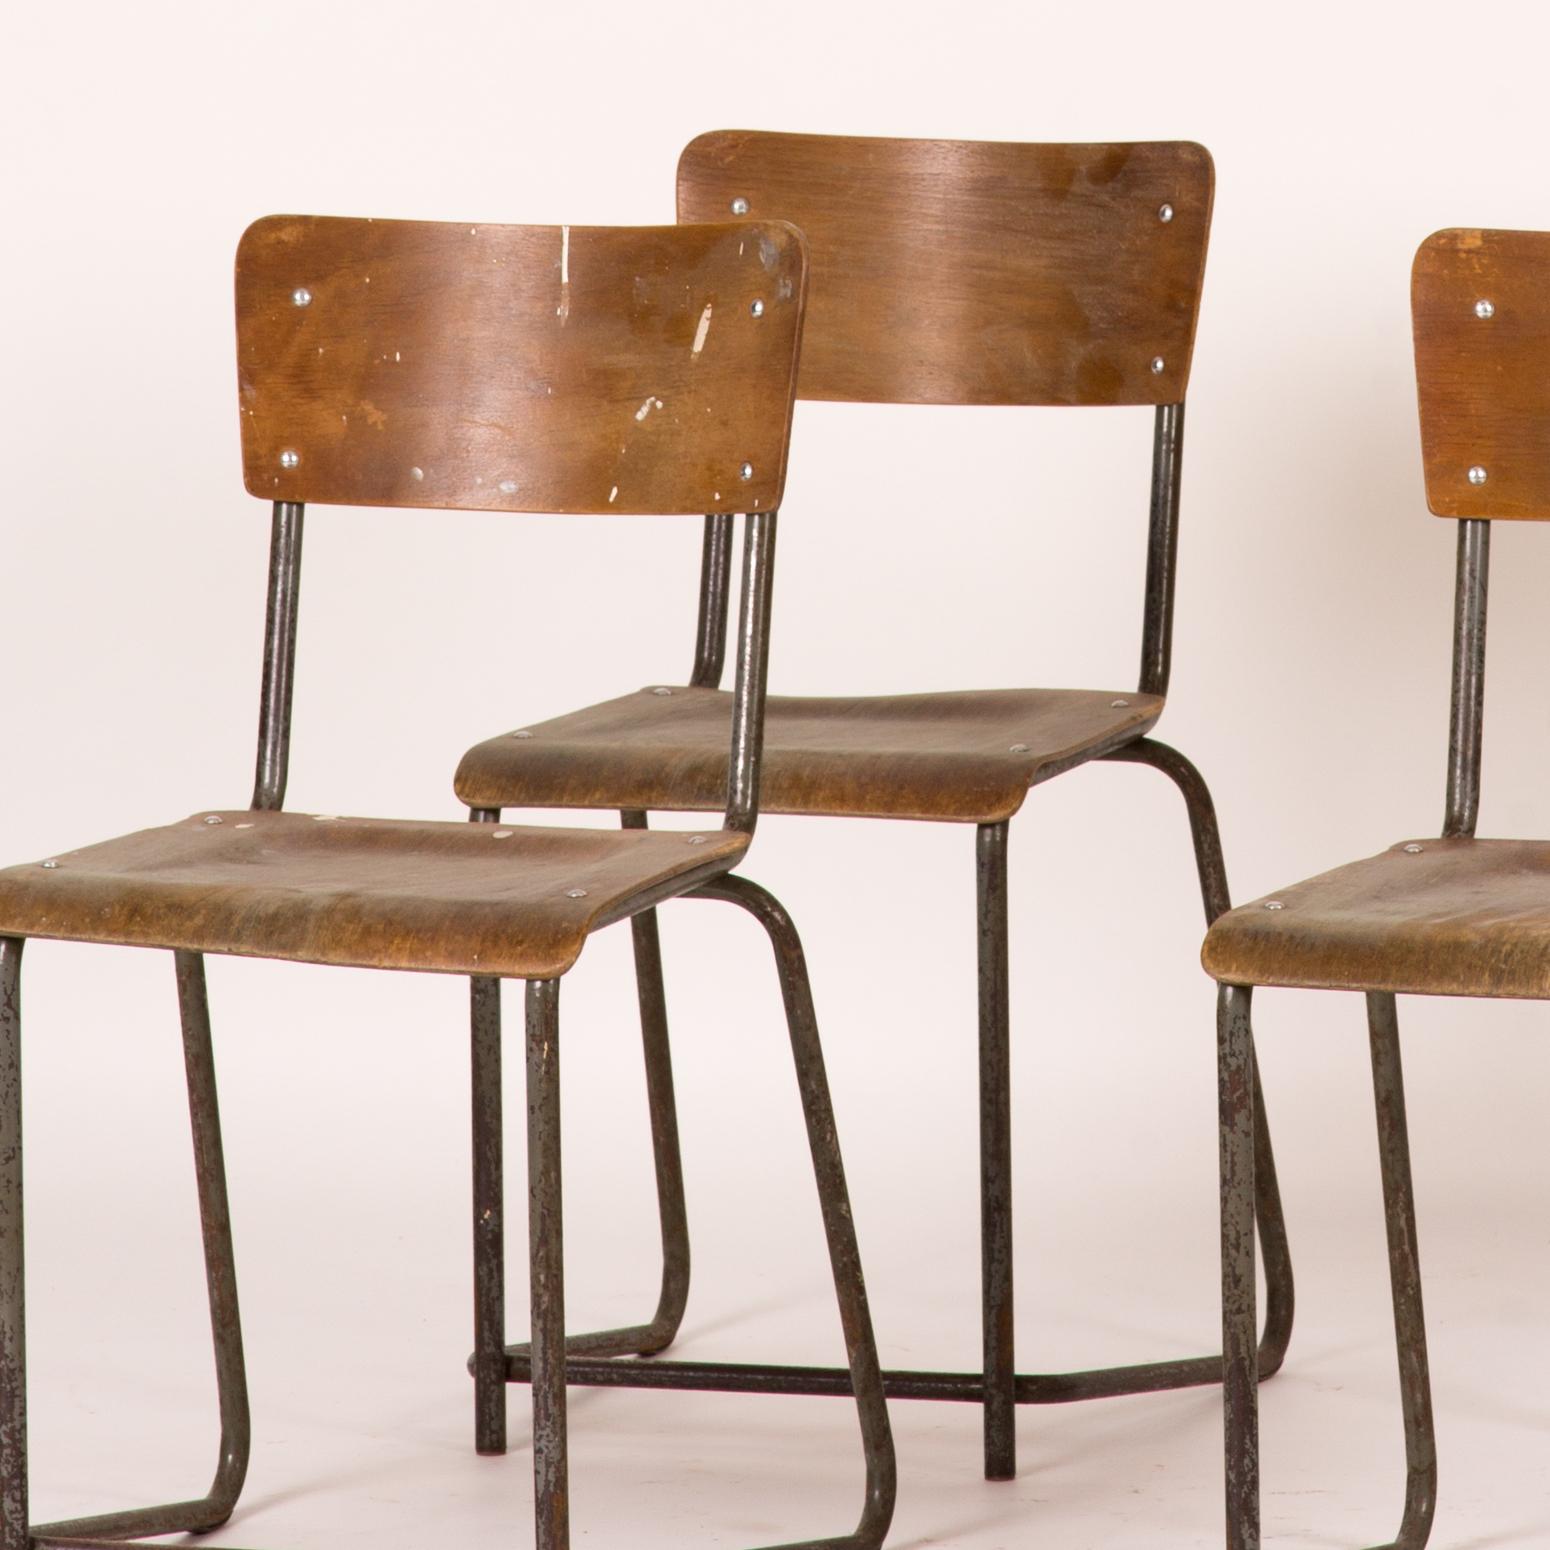 English Set of 8 Wood and Metal Dining Chairs from 1930s England For Sale